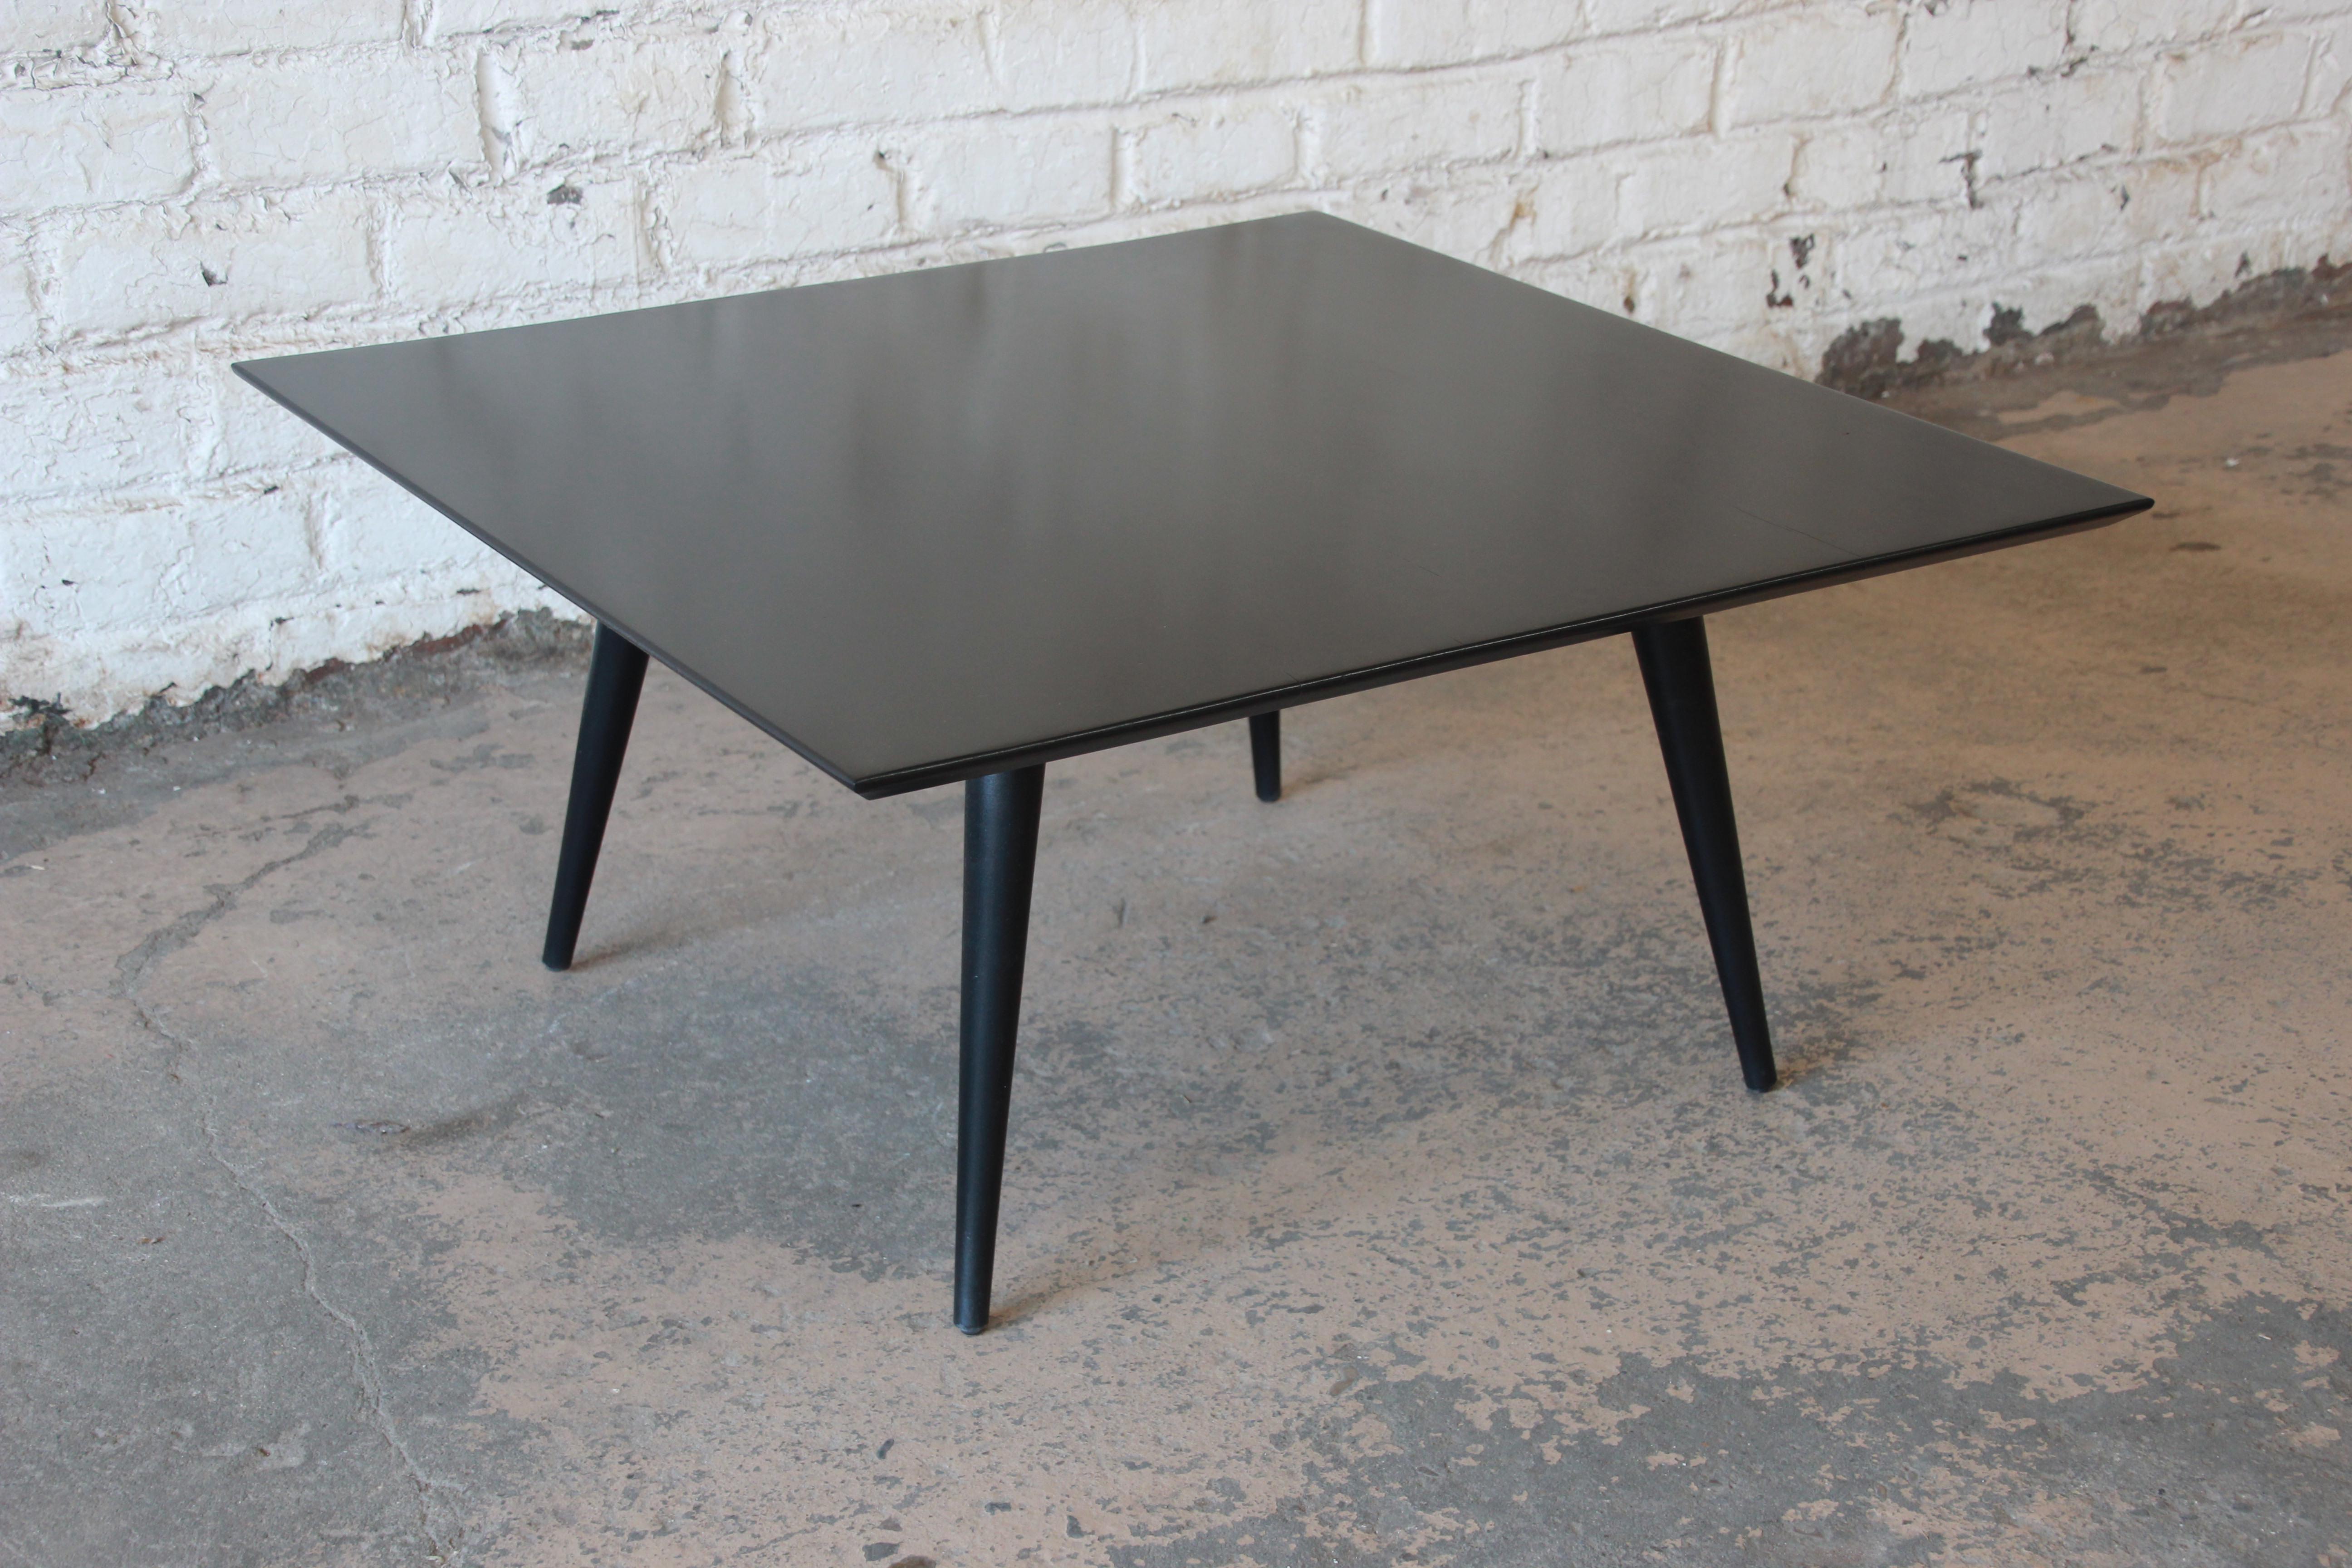 Offering a sleek and stylish Mid-Century Modern coffee table designed by Paul McCobb for his Planner Group line for Winchendon Furniture. The table features solid birch construction with a black lacquered finish and nice tall tapered legs. The table